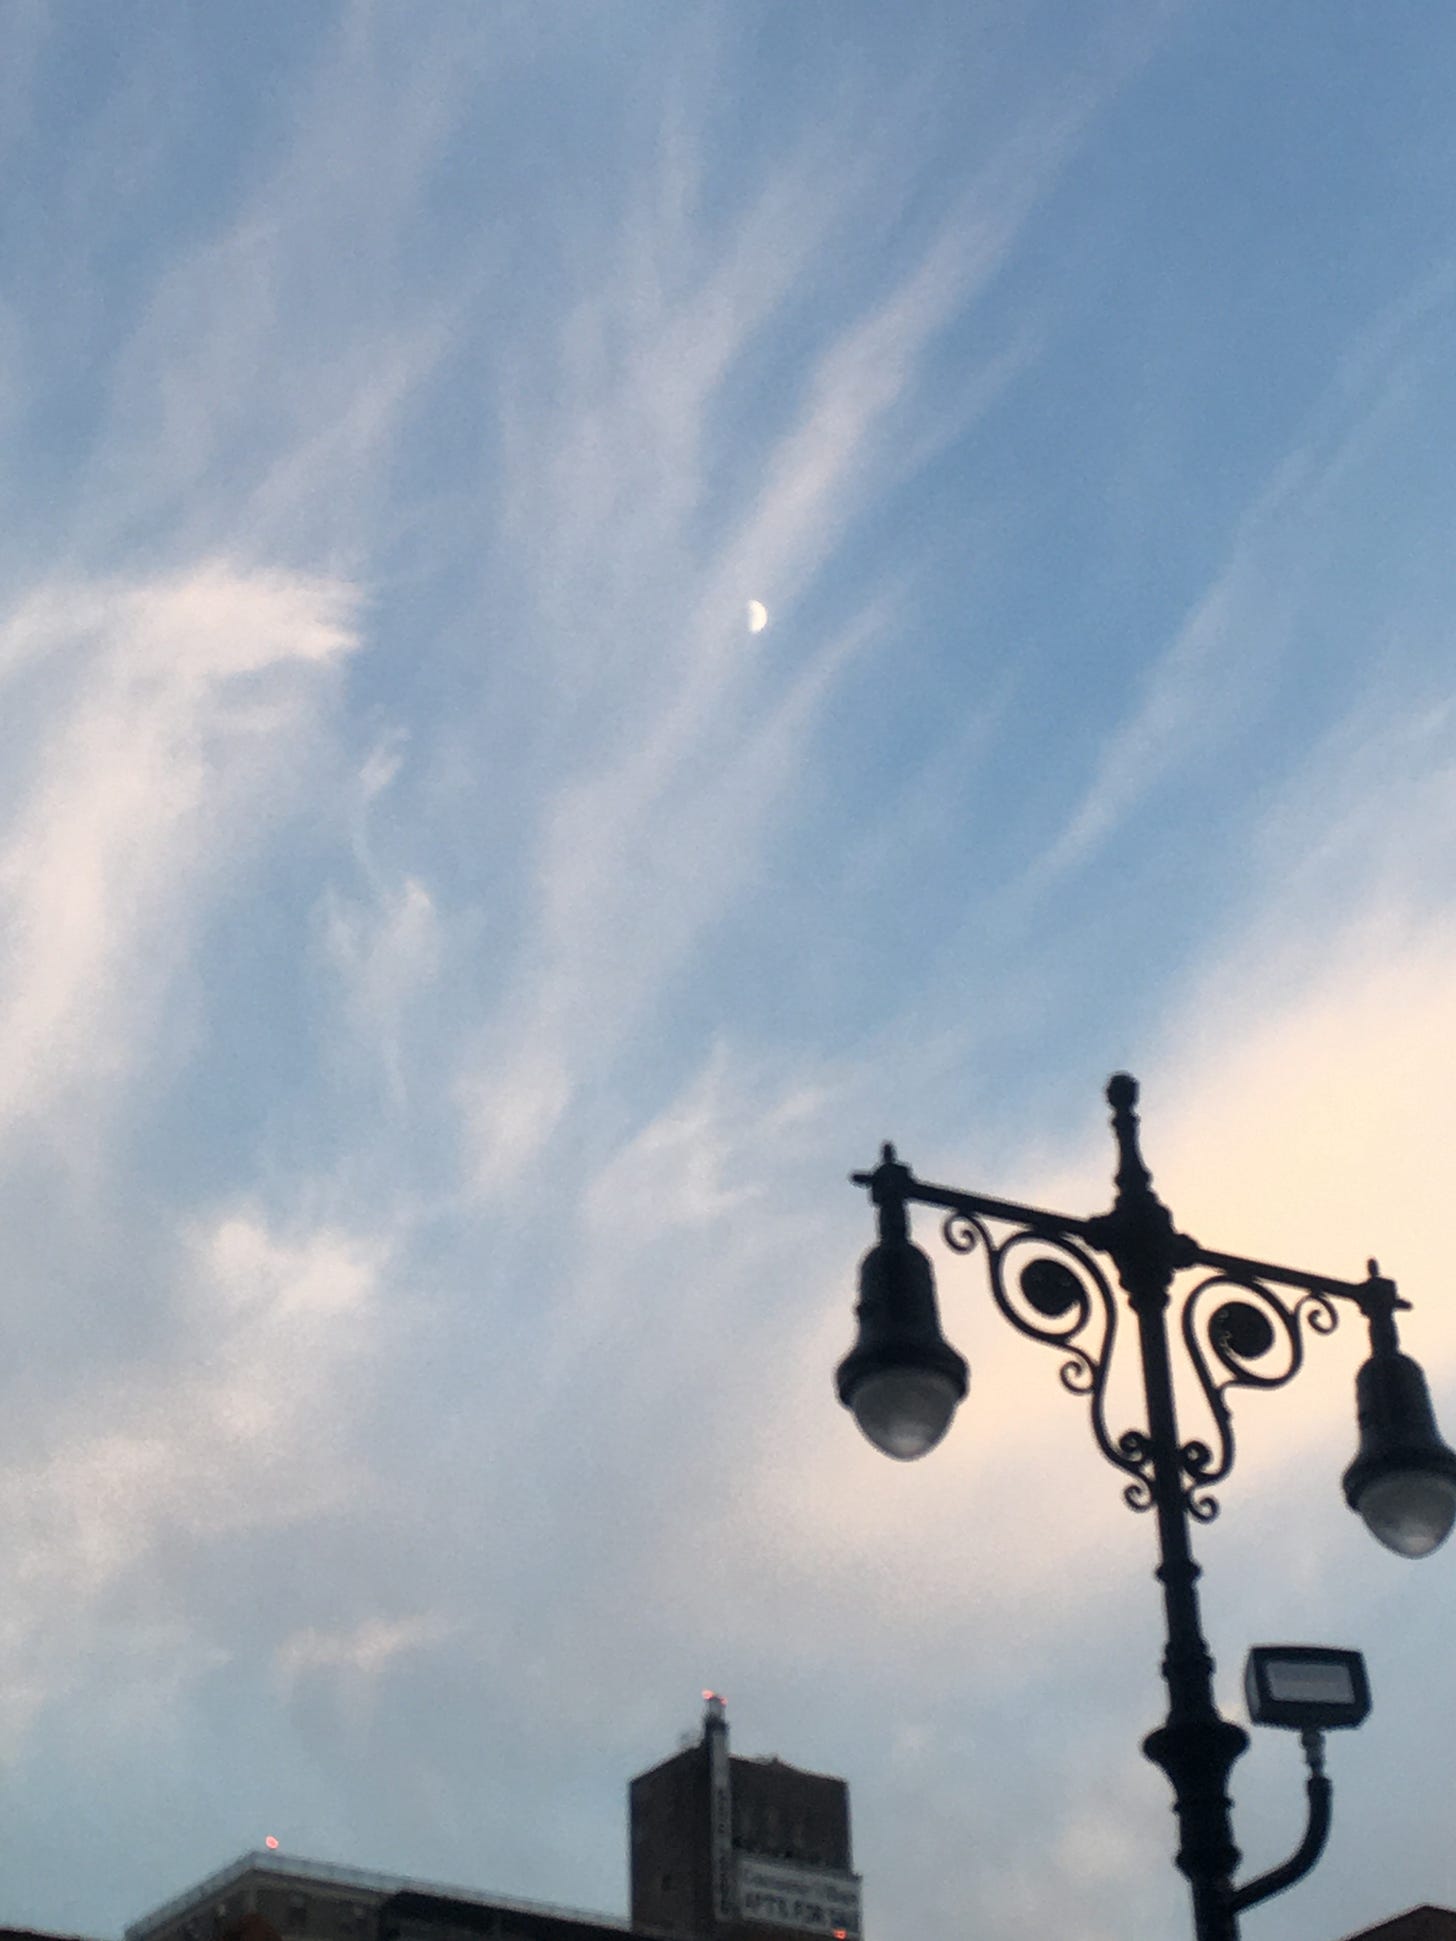 photo by me: first quarter moon on dec 21 with wispy clouds above a lampost and top of a building